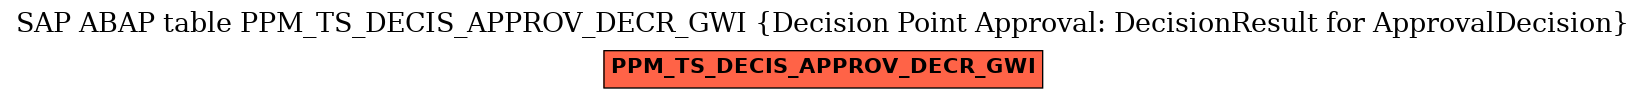 E-R Diagram for table PPM_TS_DECIS_APPROV_DECR_GWI (Decision Point Approval: DecisionResult for ApprovalDecision)